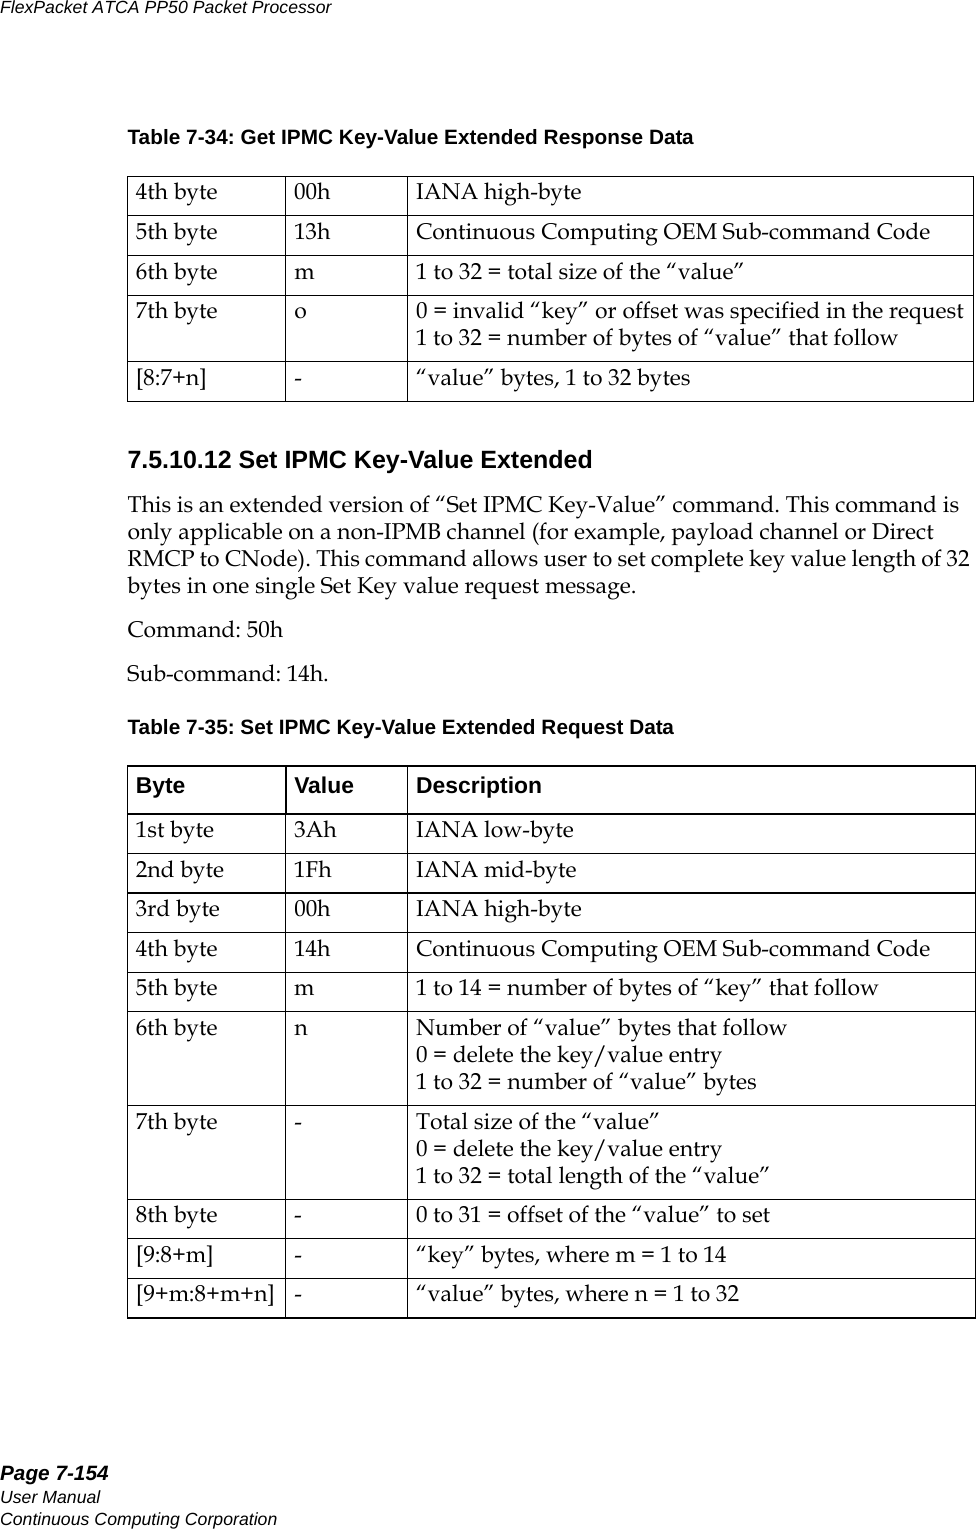 Page 7-154User ManualContinuous Computing CorporationFlexPacket ATCA PP50 Packet Processor     Preliminary7.5.10.12 Set IPMC Key-Value ExtendedThis is an extended version of “Set IPMC Key-Value” command. This command is only applicable on a non-IPMB channel (for example, payload channel or Direct RMCP to CNode). This command allows user to set complete key value length of 32 bytes in one single Set Key value request message.Command: 50hSub-command: 14h.4th byte 00h IANA high-byte5th byte 13h Continuous Computing OEM Sub-command Code6th byte m 1 to 32 = total size of the “value”7th byte o 0 = invalid “key” or offset was specified in the request1 to 32 = number of bytes of “value” that follow[8:7+n] - “value” bytes, 1 to 32 bytesTable 7-35: Set IPMC Key-Value Extended Request DataByte Value Description1st byte 3Ah IANA low-byte2nd byte 1Fh IANA mid-byte3rd byte 00h IANA high-byte4th byte 14h Continuous Computing OEM Sub-command Code5th byte m 1 to 14 = number of bytes of “key” that follow6th byte n Number of “value” bytes that follow0 = delete the key/value entry1 to 32 = number of “value” bytes7th byte - Total size of the “value”0 = delete the key/value entry1 to 32 = total length of the “value”8th byte - 0 to 31 = offset of the “value” to set[9:8+m] - “key” bytes, where m = 1 to 14[9+m:8+m+n] - “value” bytes, where n = 1 to 32Table 7-34: Get IPMC Key-Value Extended Response Data